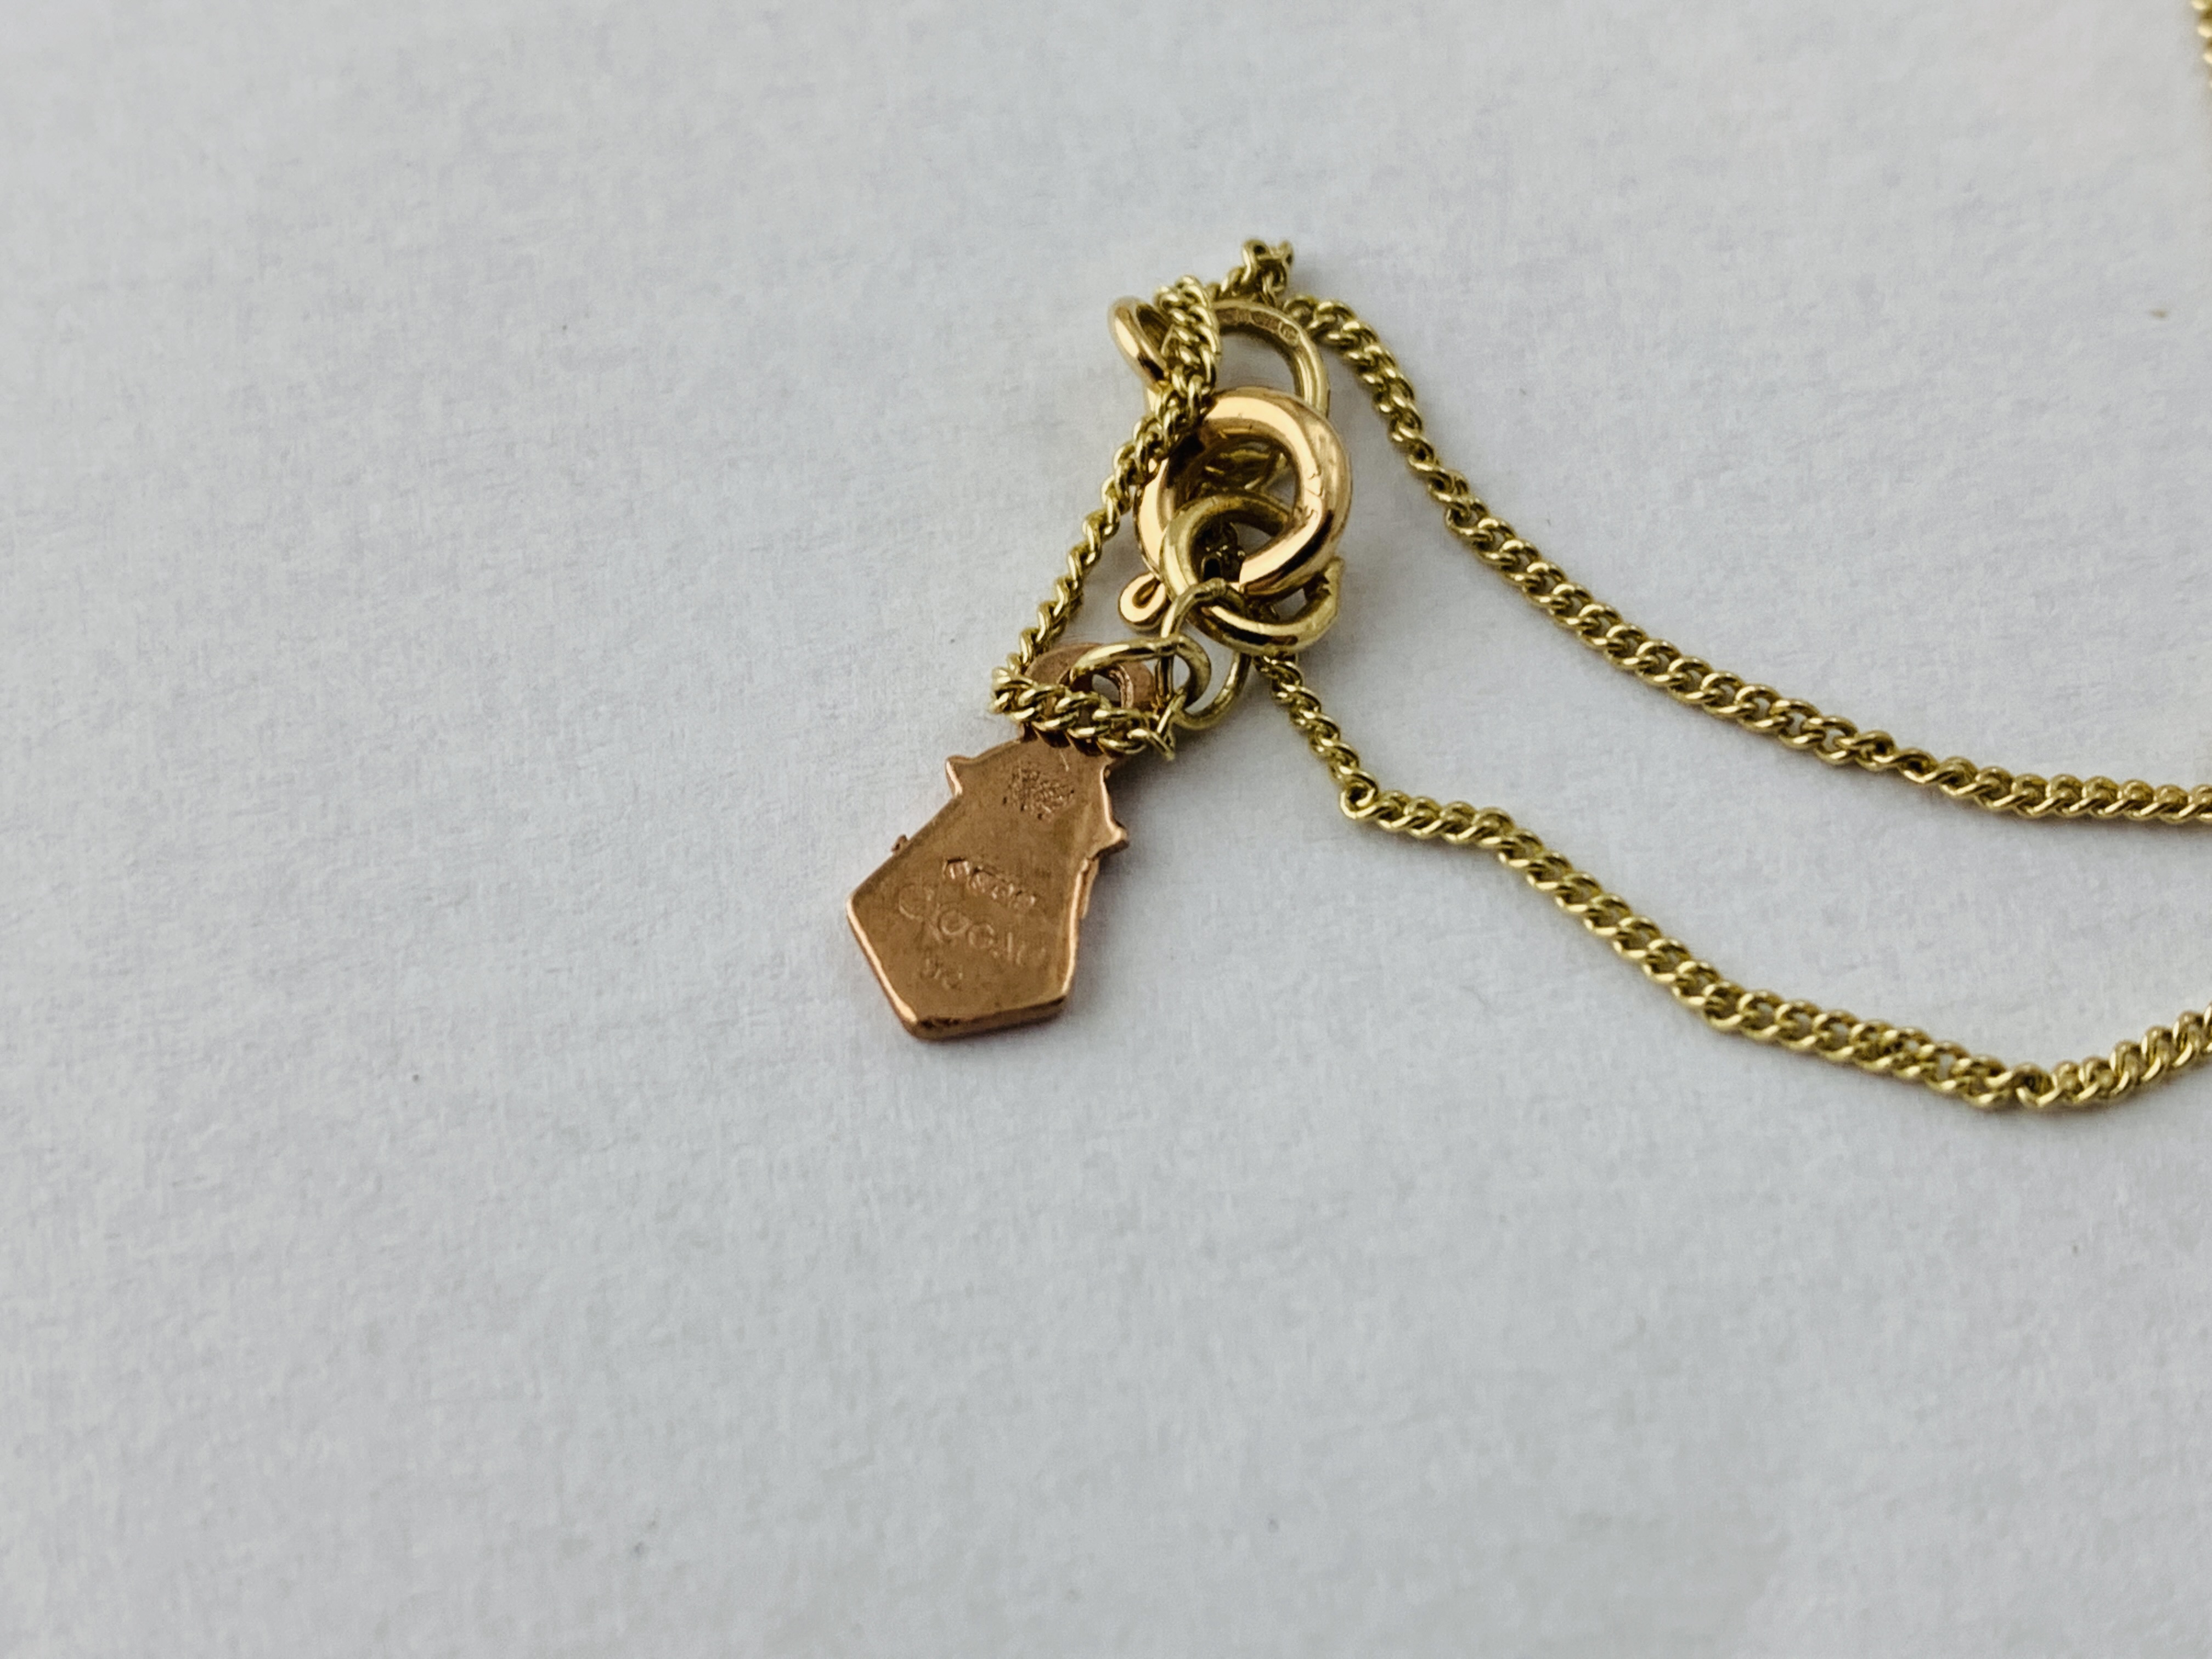 3 X 9CT GOLD PENDANT NECKLACES - Image 6 of 8